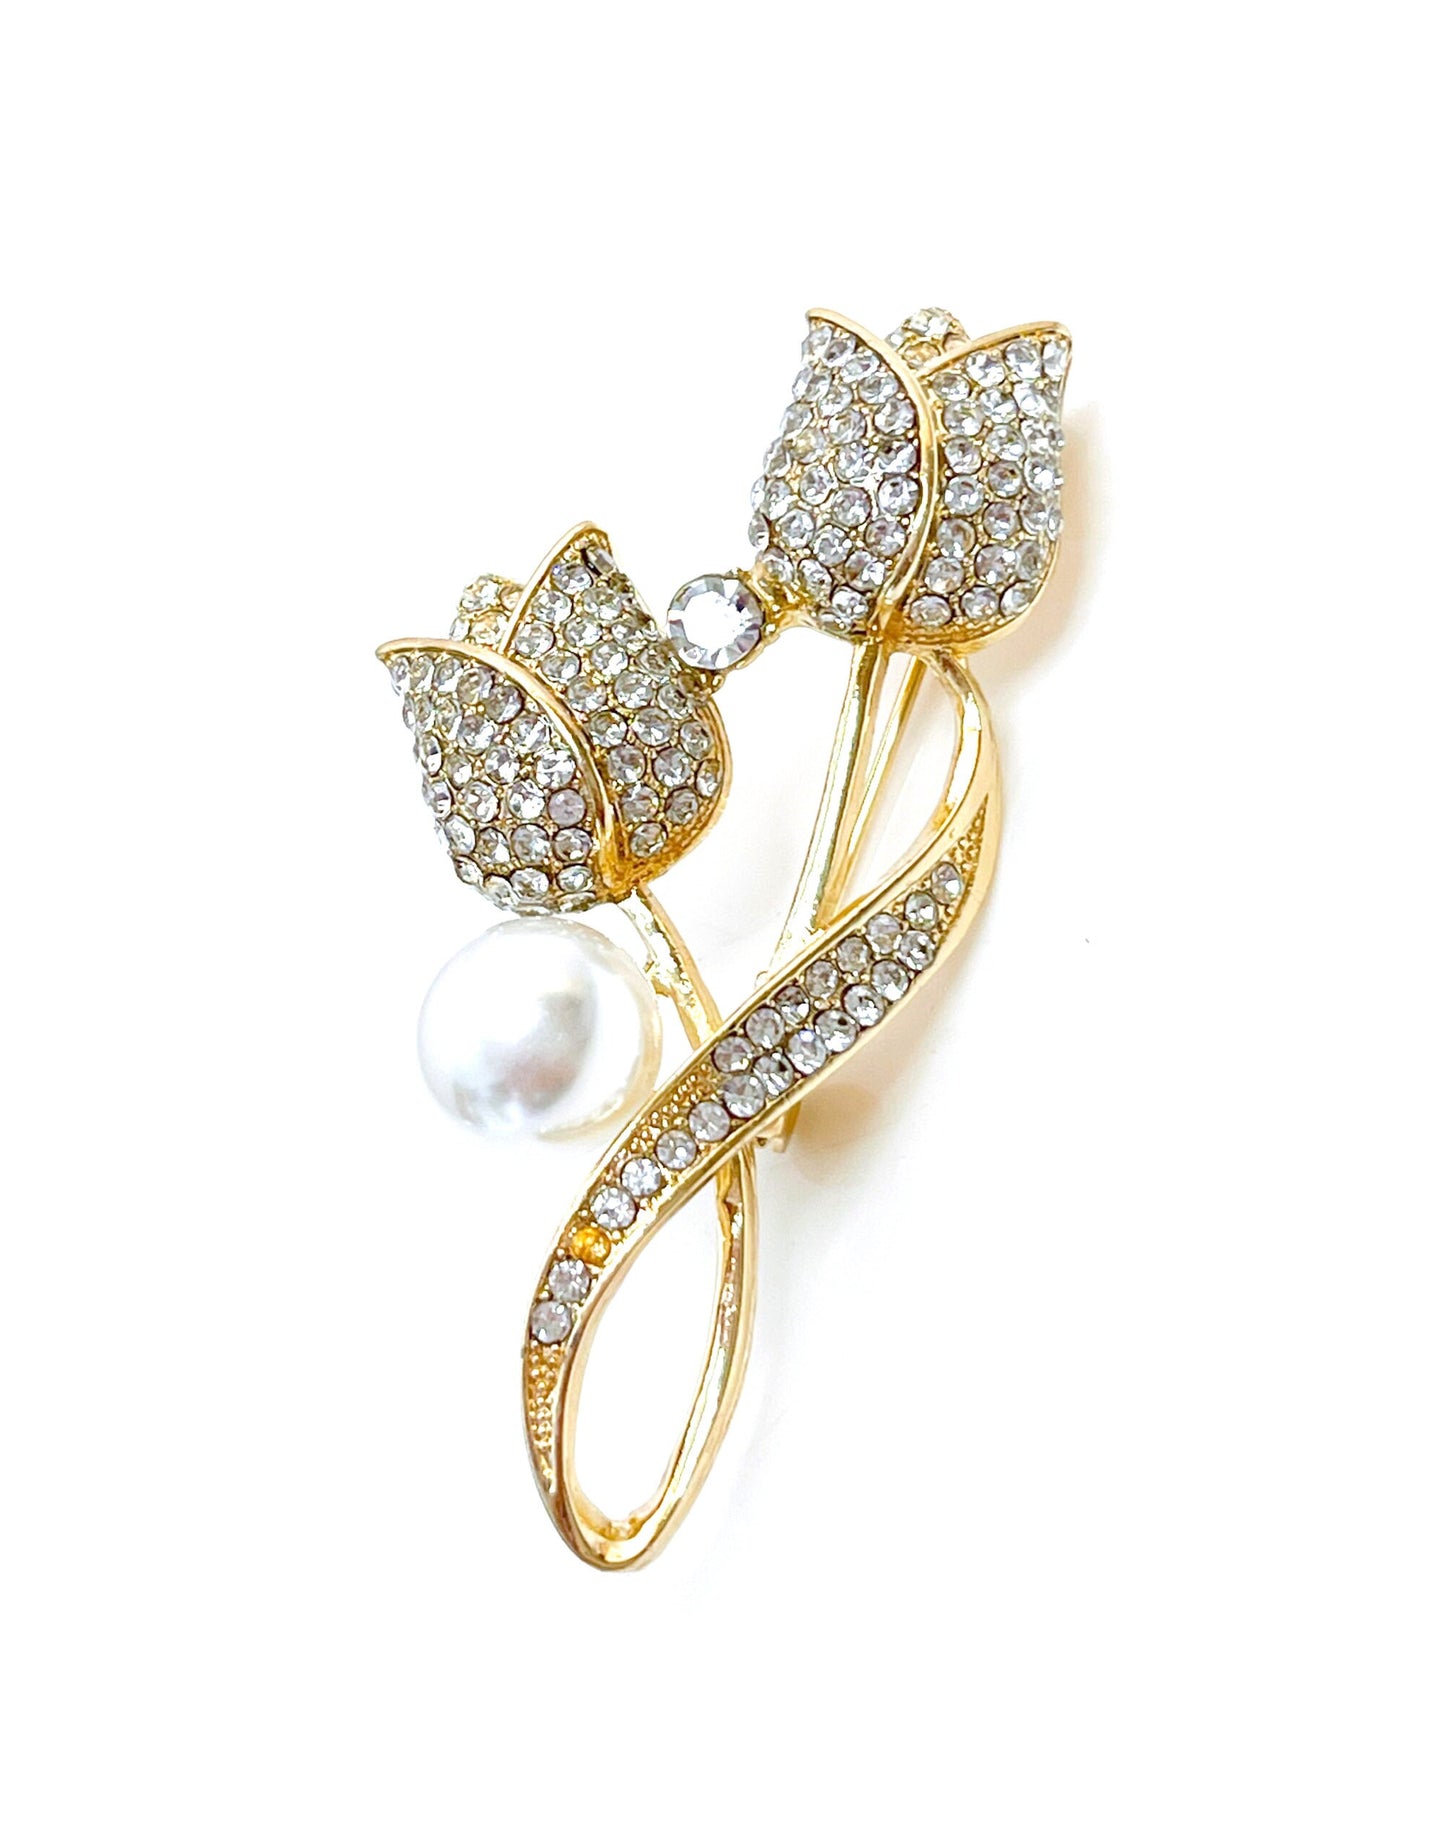 Pretty Crystal Tulip Brooch, Gold Tulip with Pearl and Crystals, Flower Jacket Pin, Brooches For Women